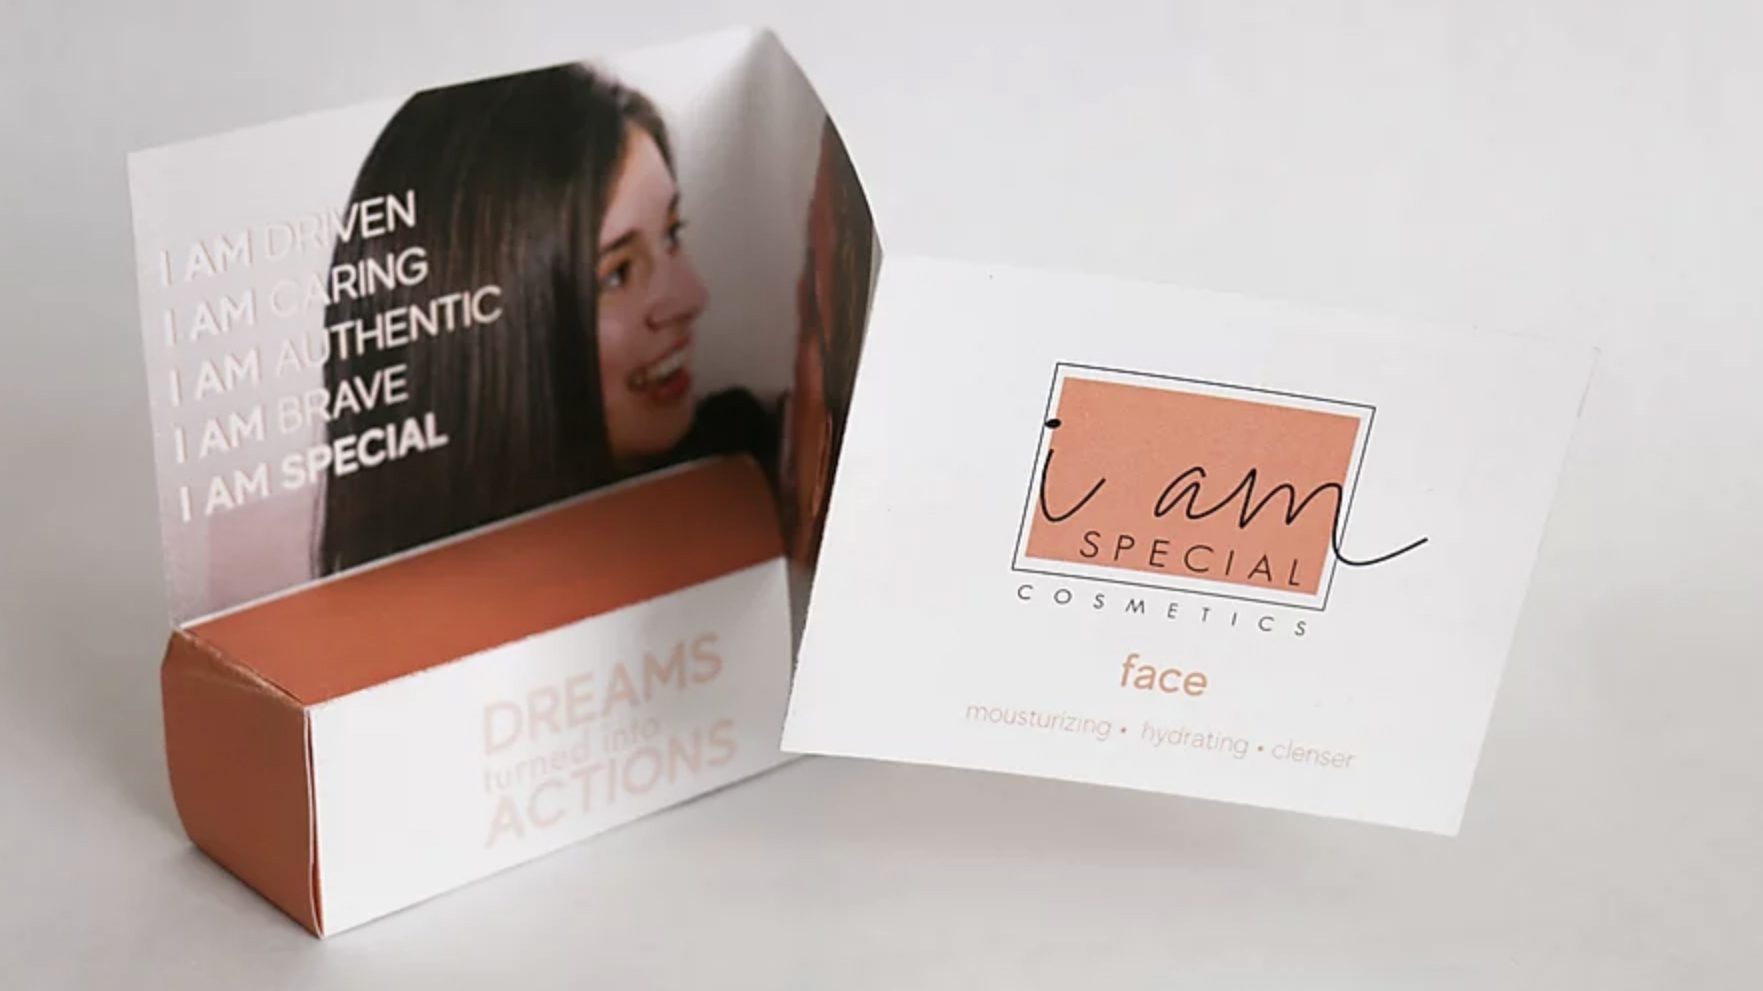 Photo of cosmetic brand packaging "I am special."